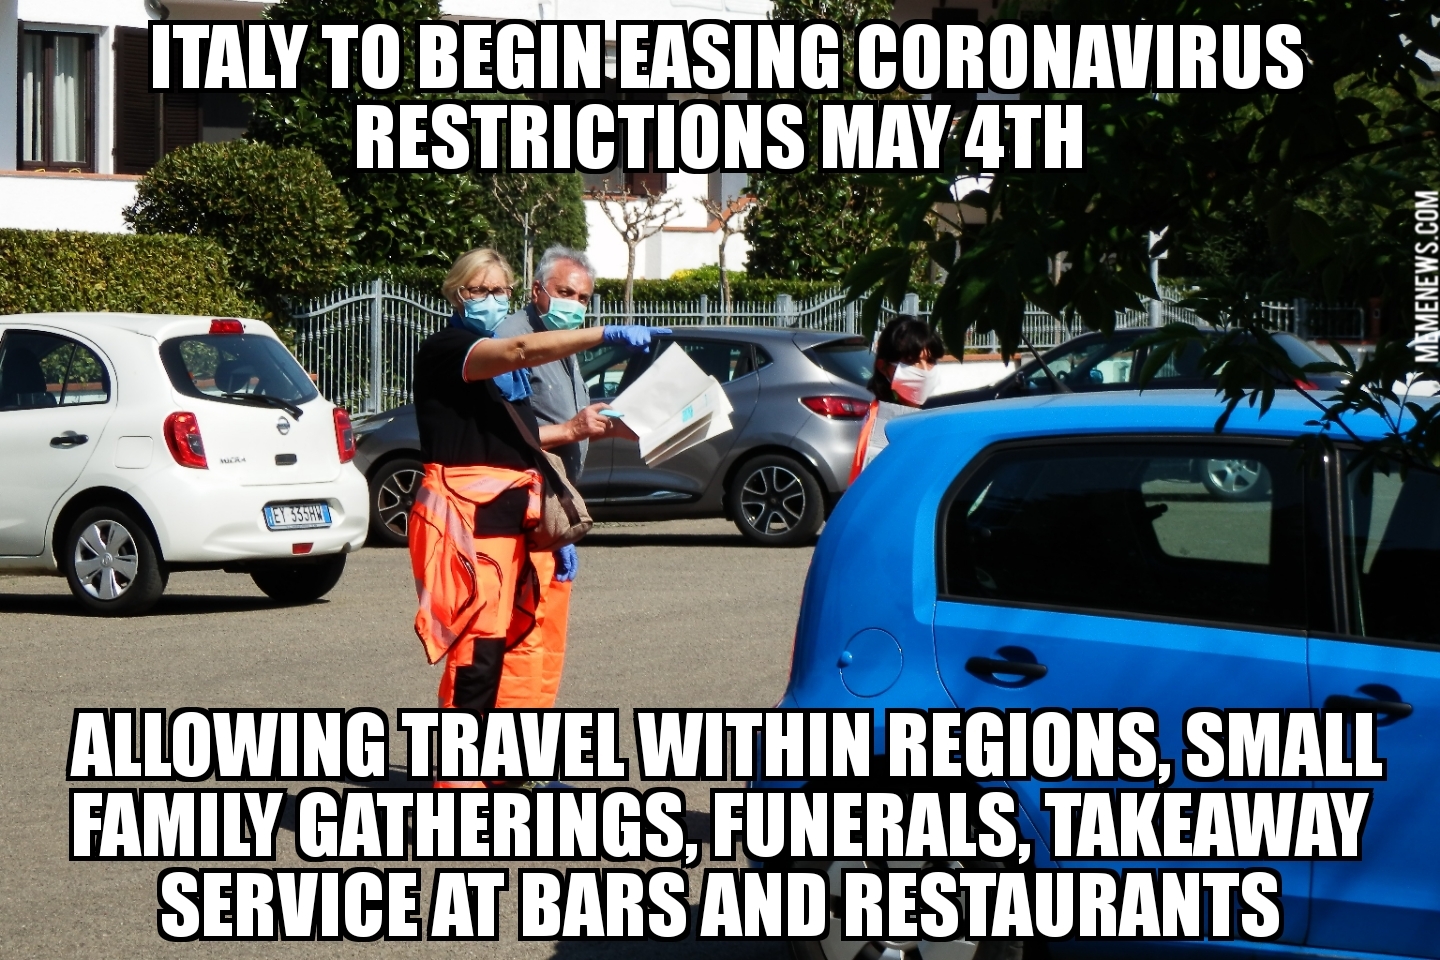 Italy to begin easing coronavirus restrictions May 4th